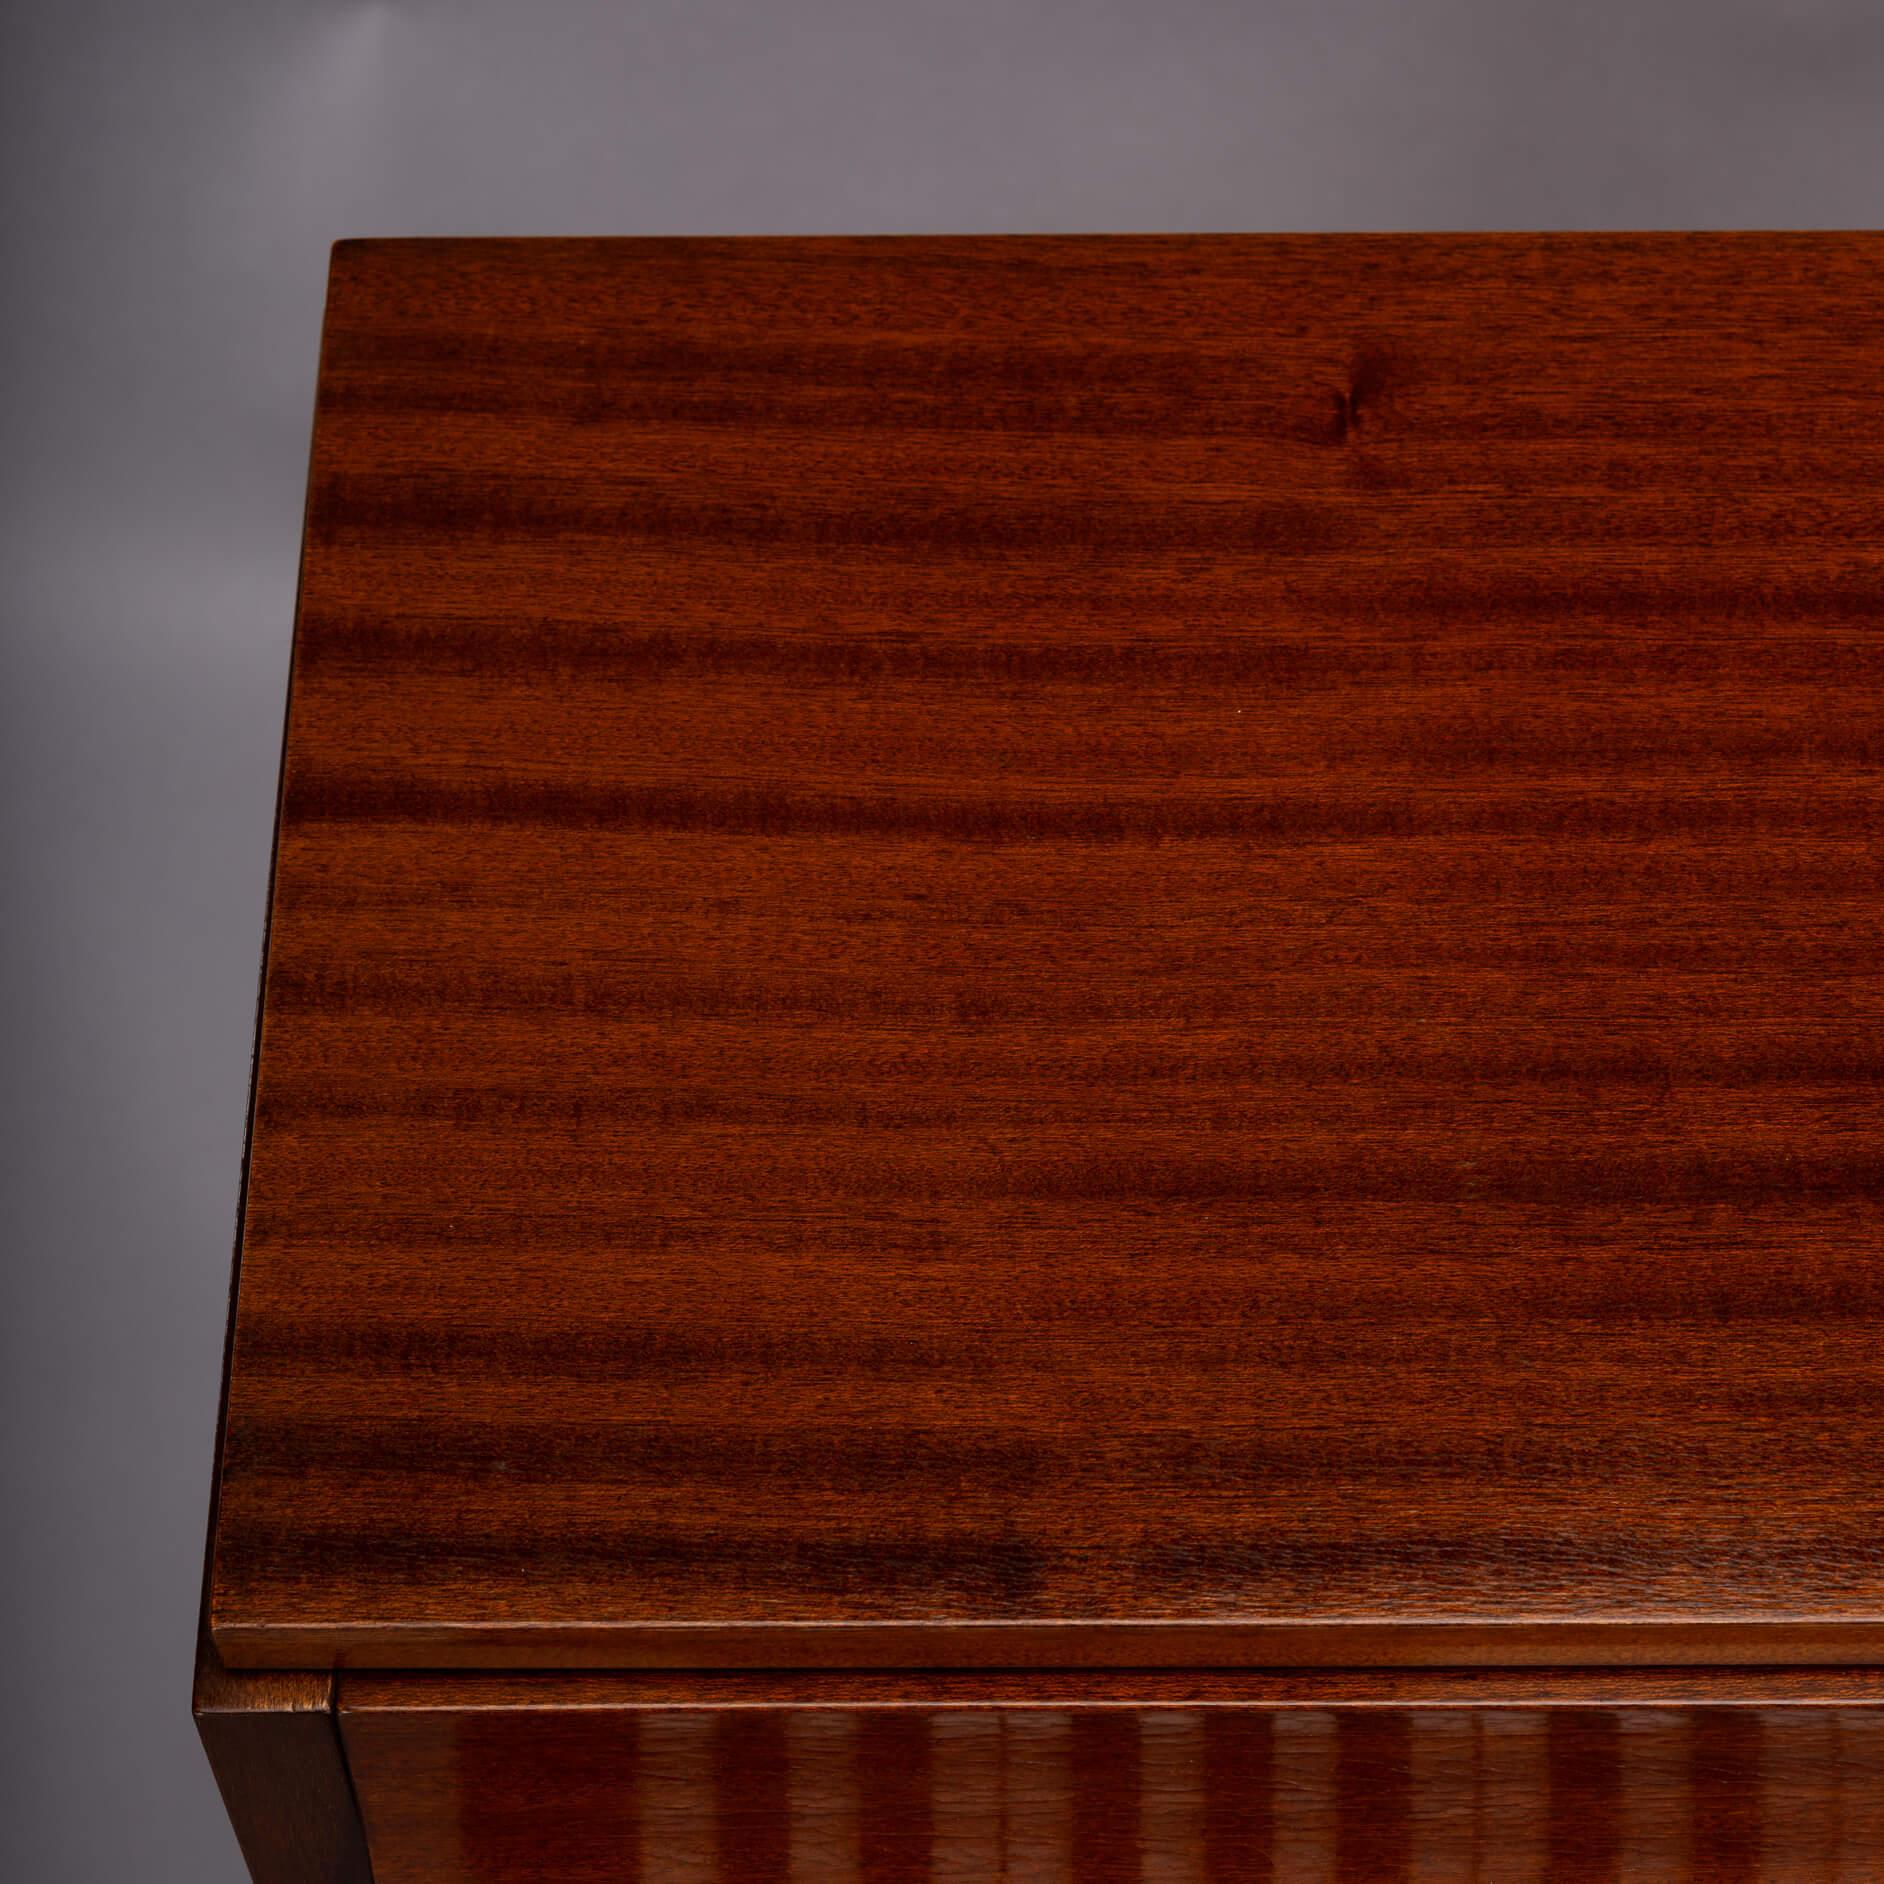 Danish Design Midcentury Pianette by Louis Zwicki in Mahogany, 1950s For Sale 1